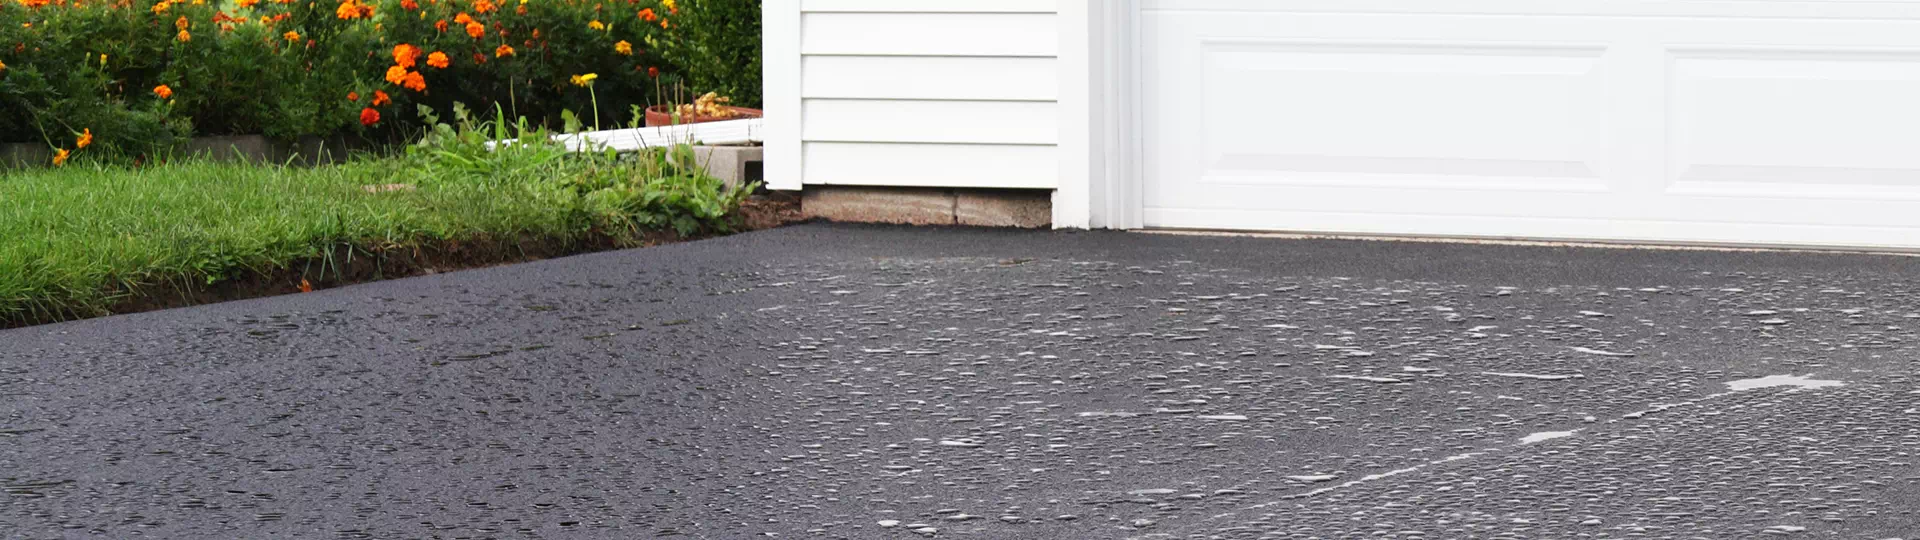 How to Clean Asphalt Driveway - Simple Green